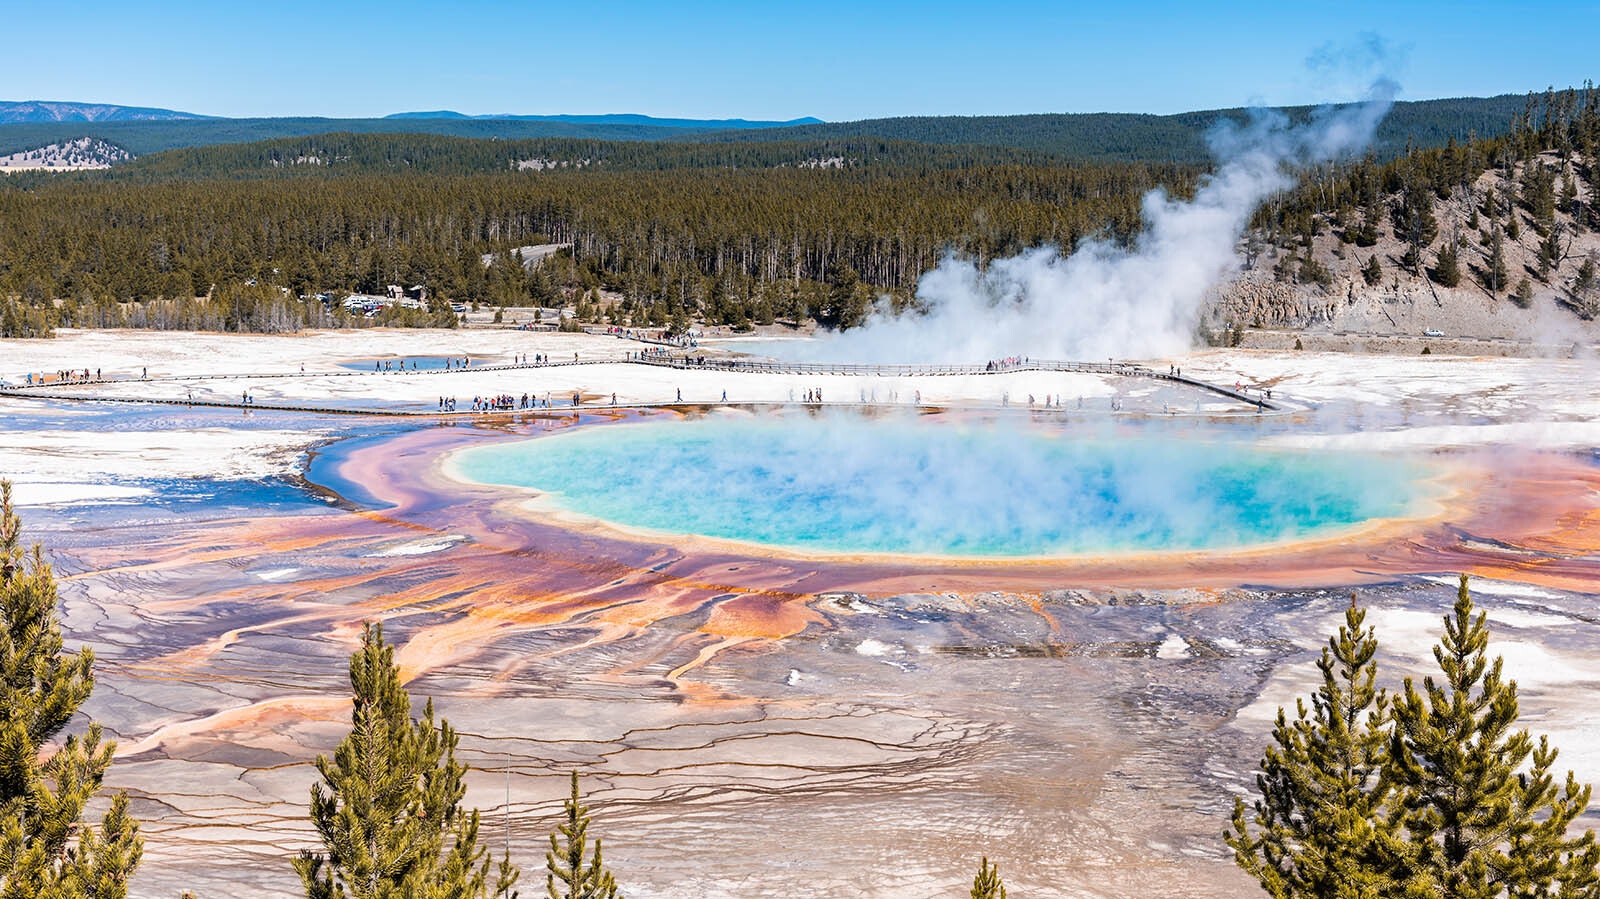 Steam rises from the colorful Grand Prismatic Hot Spring in Yellowstone National Park.